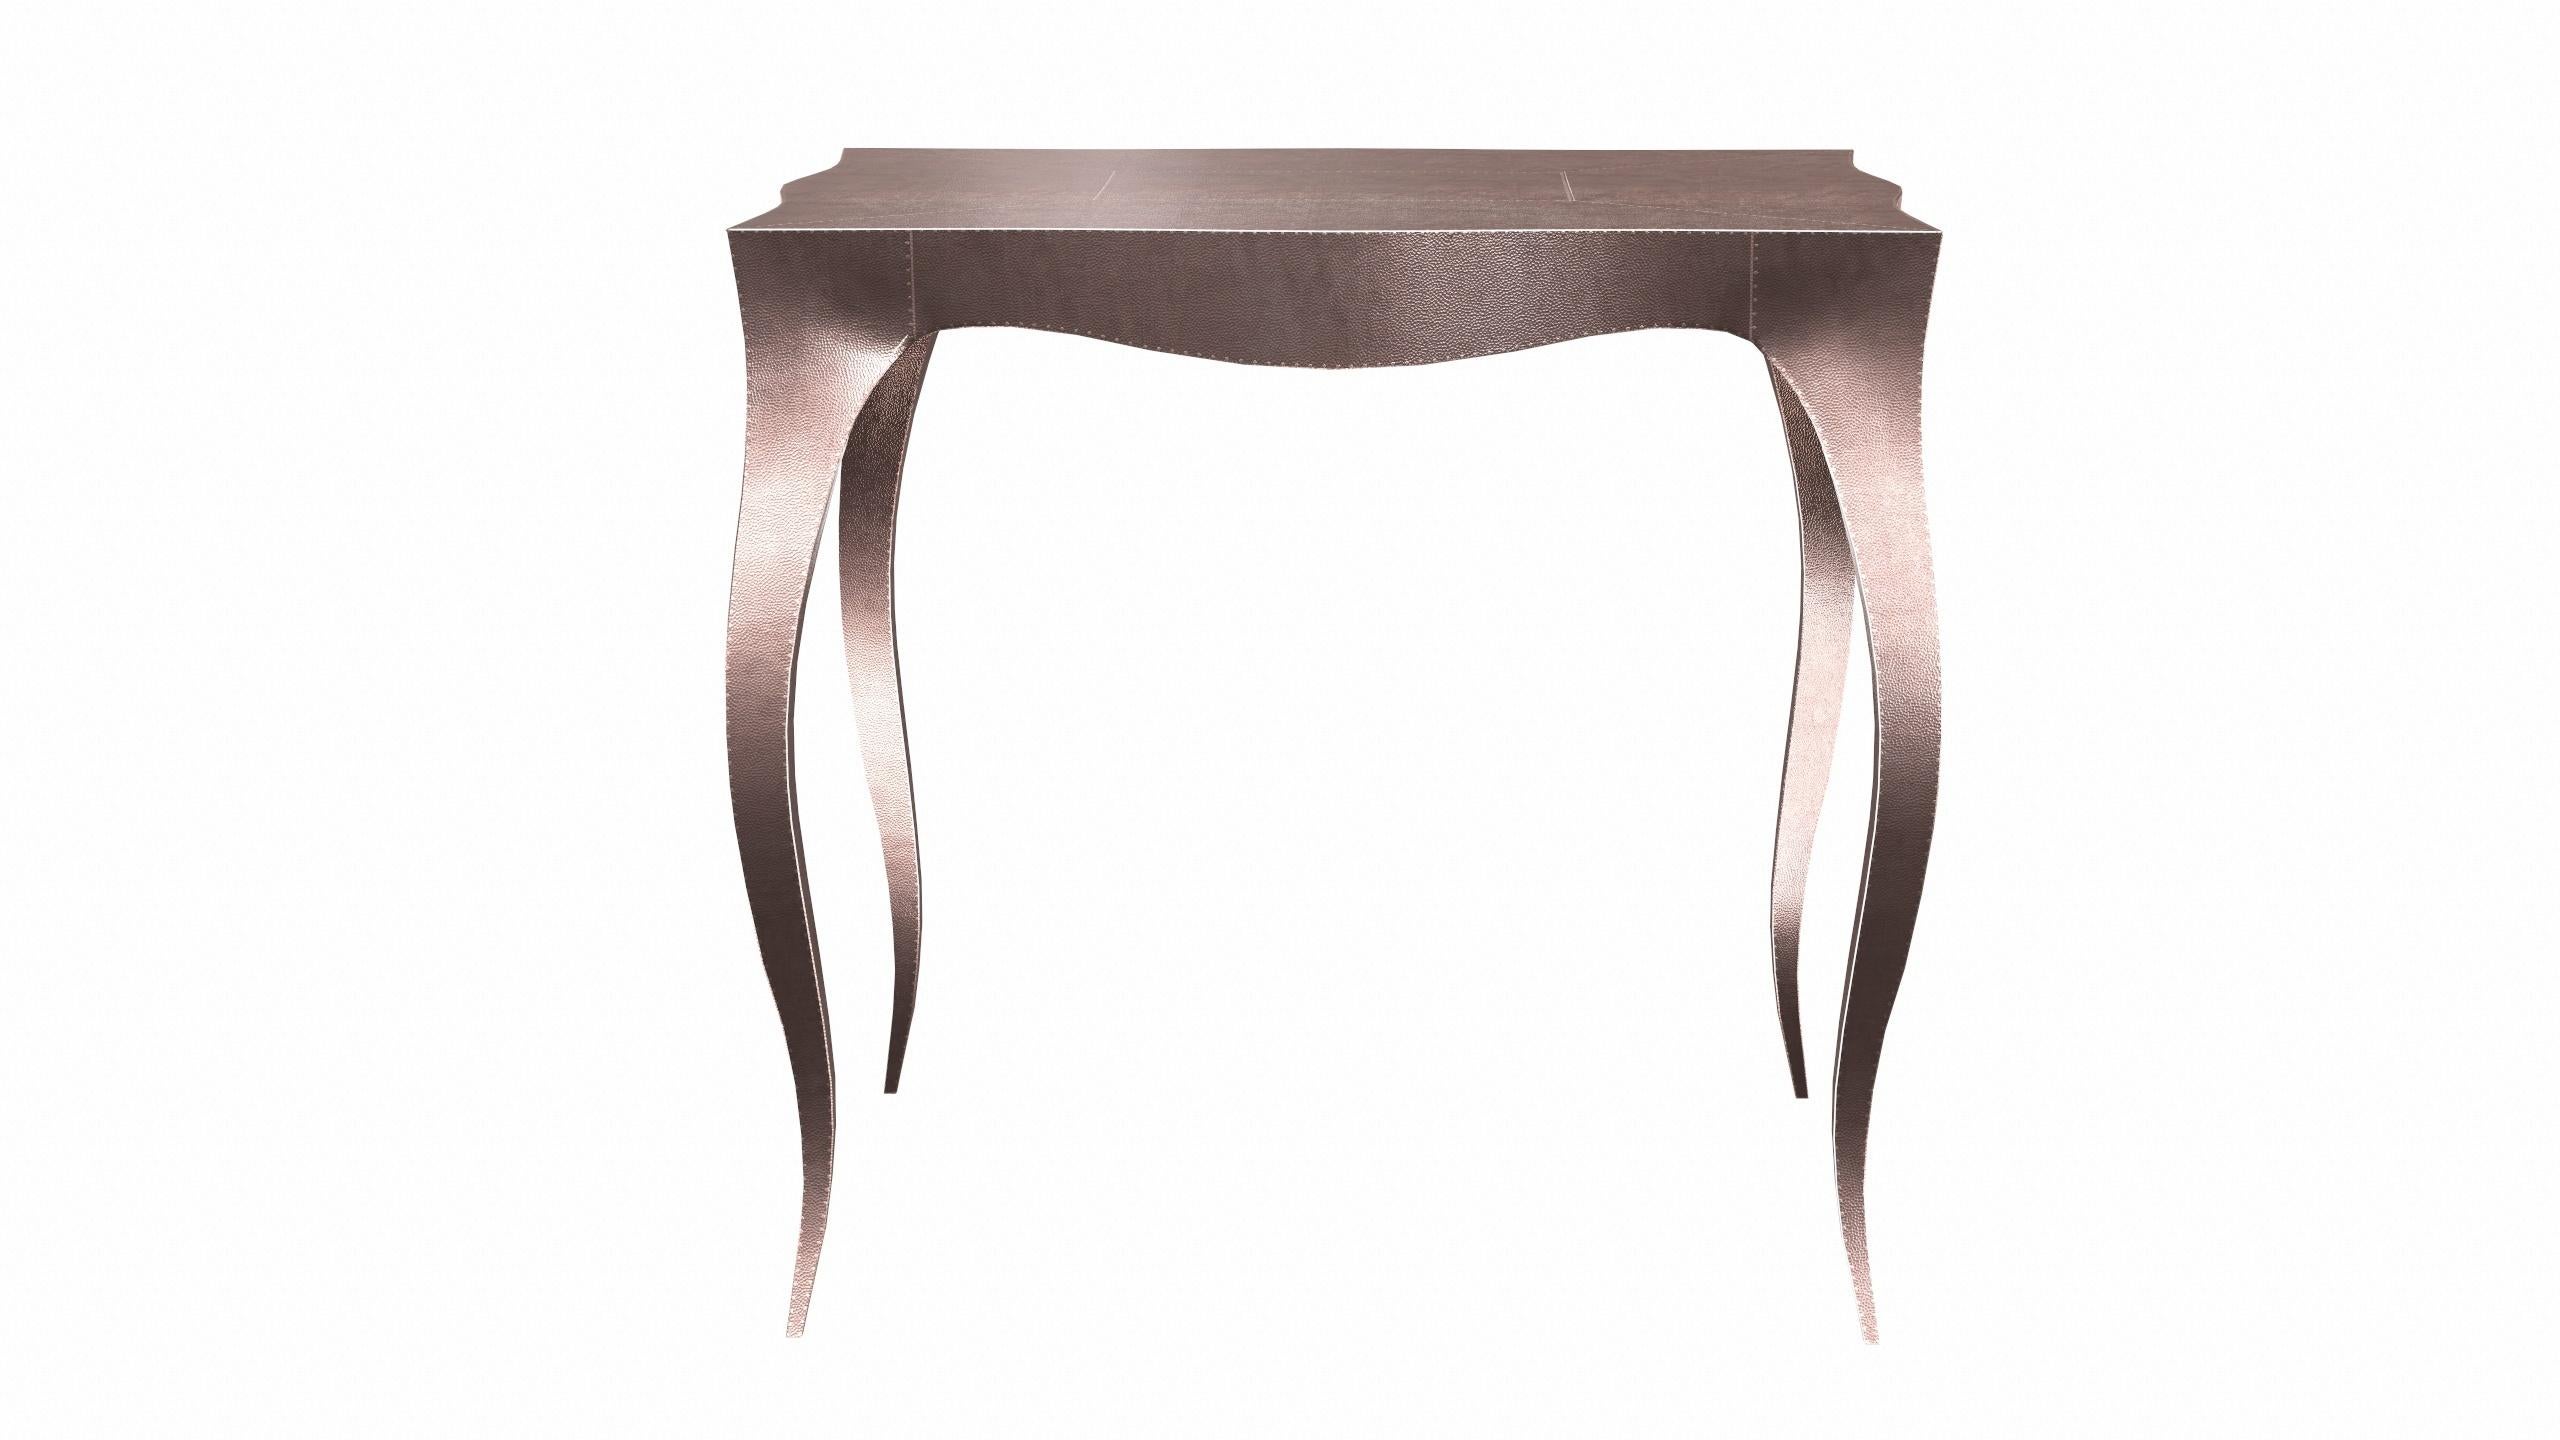 Metal Louise Art Deco Industrial and Work Tables Mid. Hammered Copper by Paul Mathieu For Sale